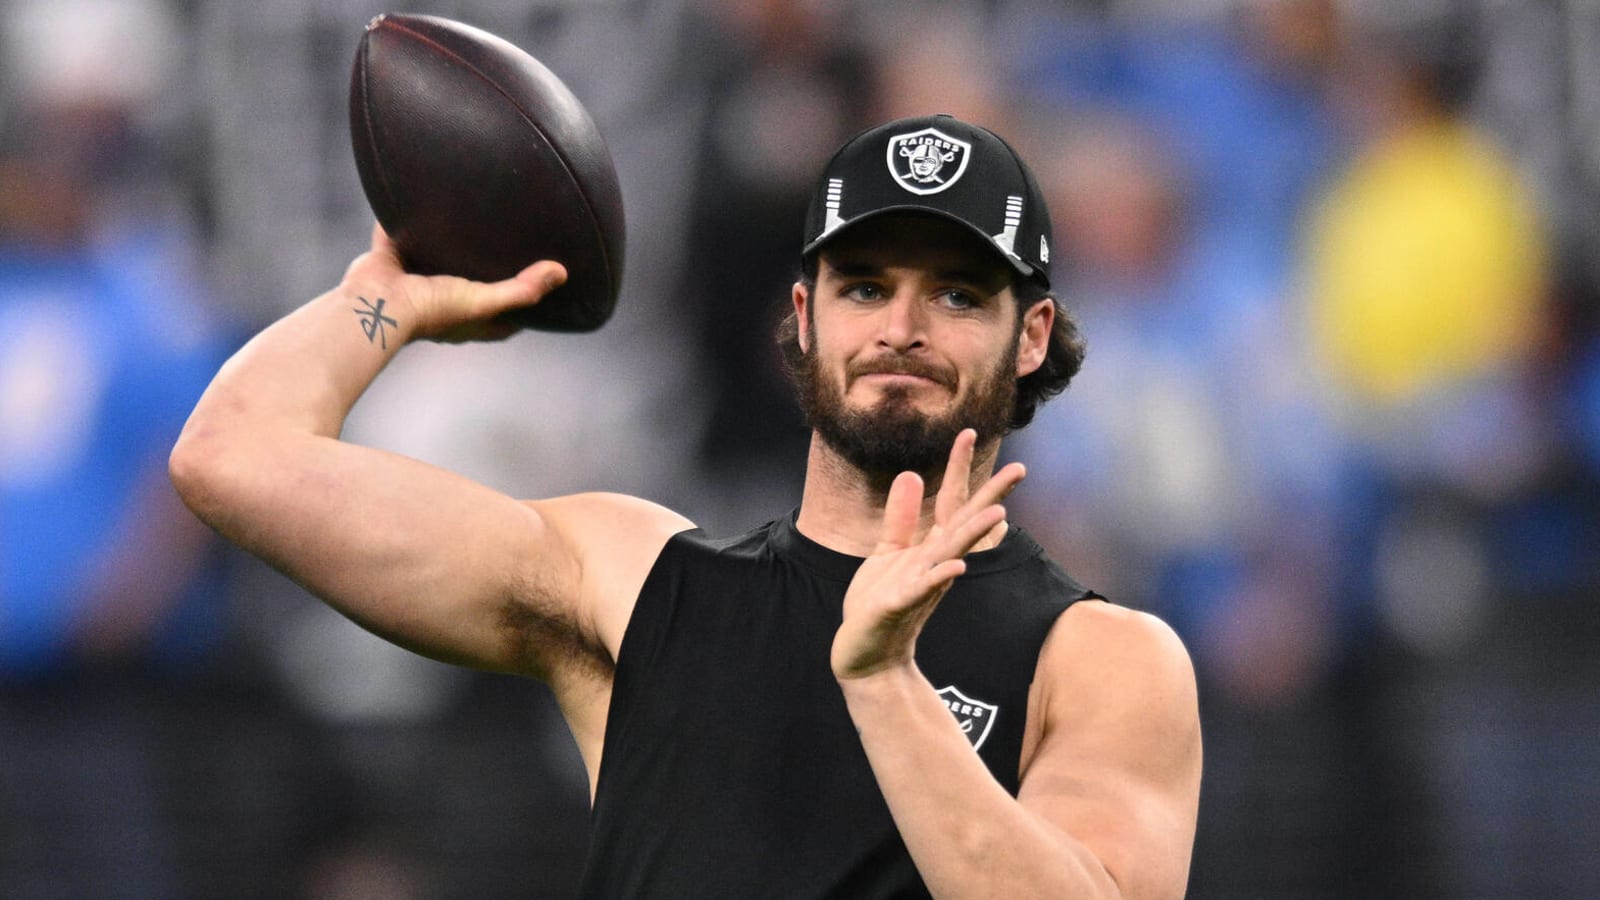 Raiders to sign QB Derek Carr to an extension 'sooner than later'?